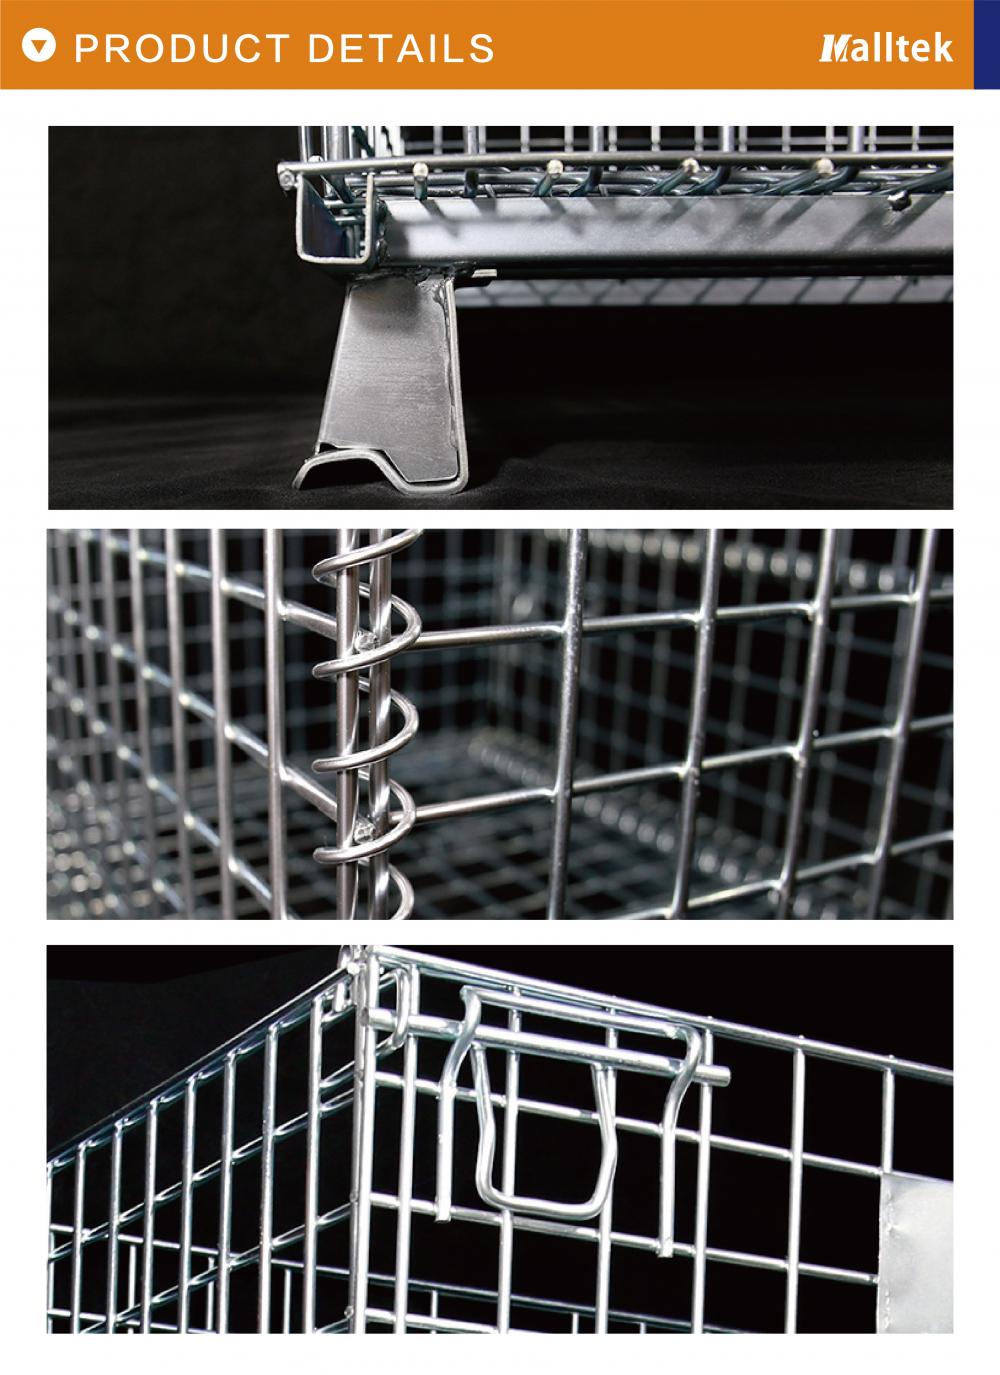 stackable storage metal foldable wire cage